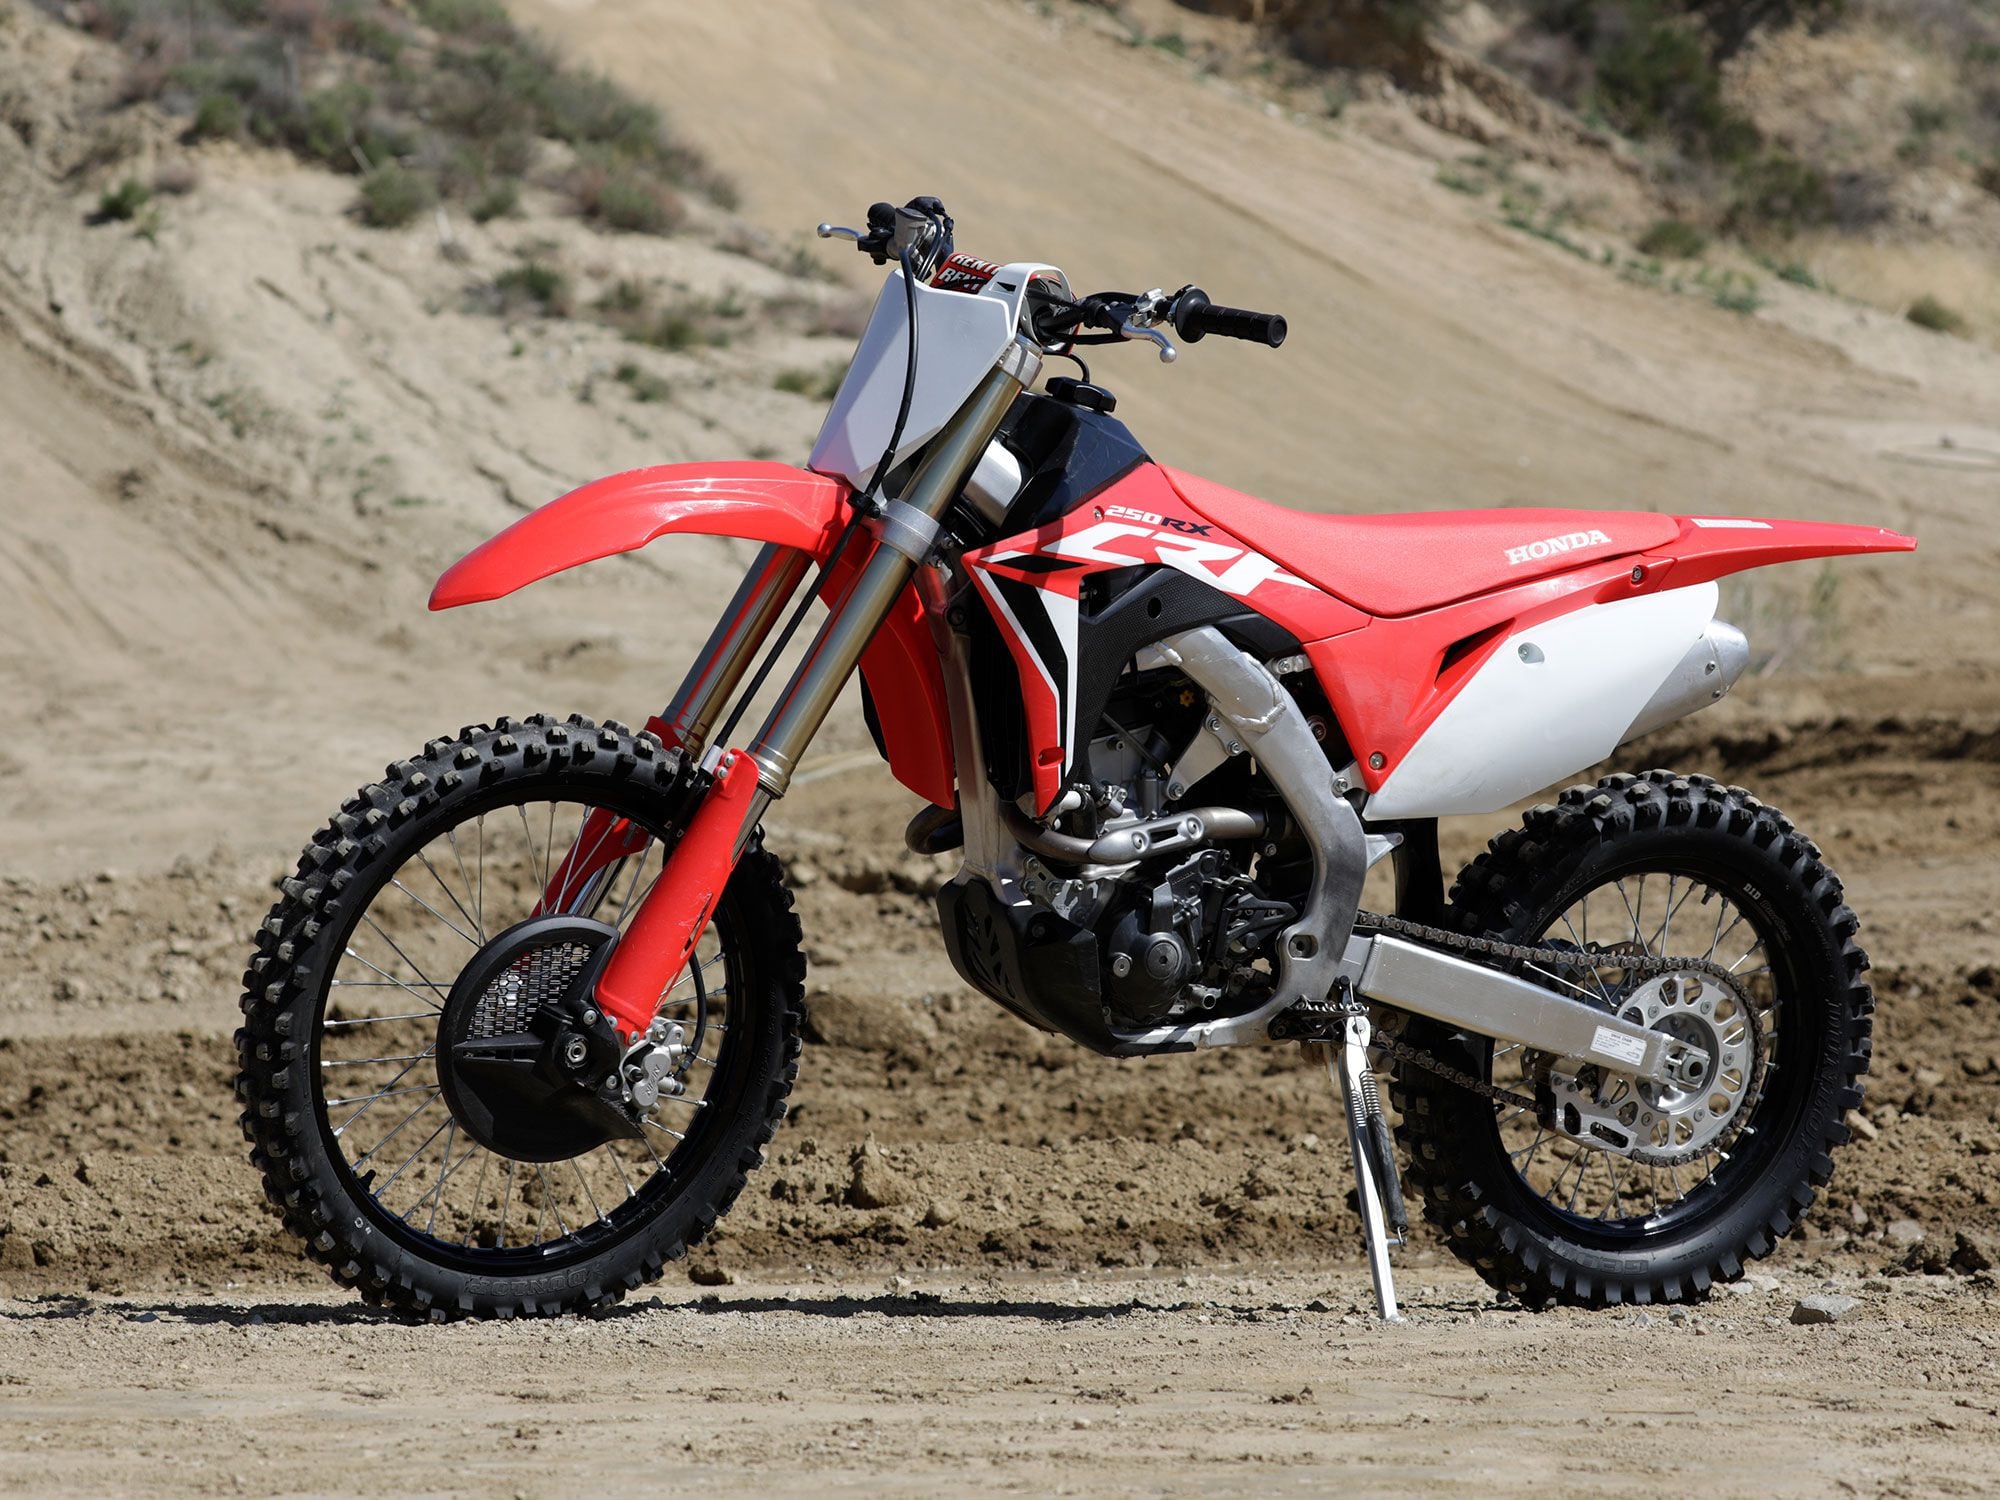 Folks looking for a versatile dirt bike that can do a little bit of everything off-road will appreciate Honda’s CRF250RX.